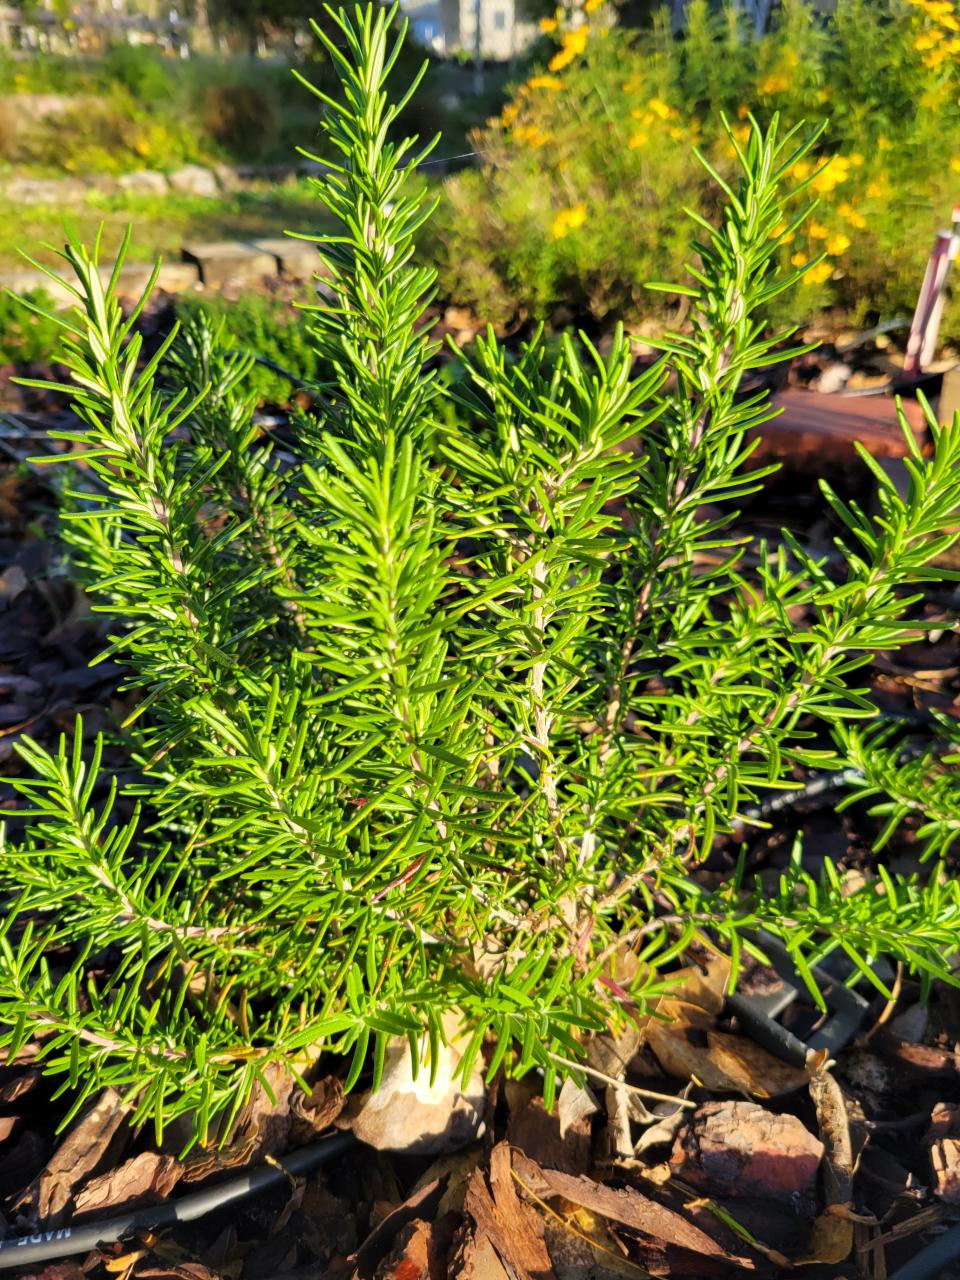 Rosemary (Rosmarinus officinalis) is a woody shrub that can grow up to 4 feet or more. It can be grown in full sun to partial shade and in well-drained soils.